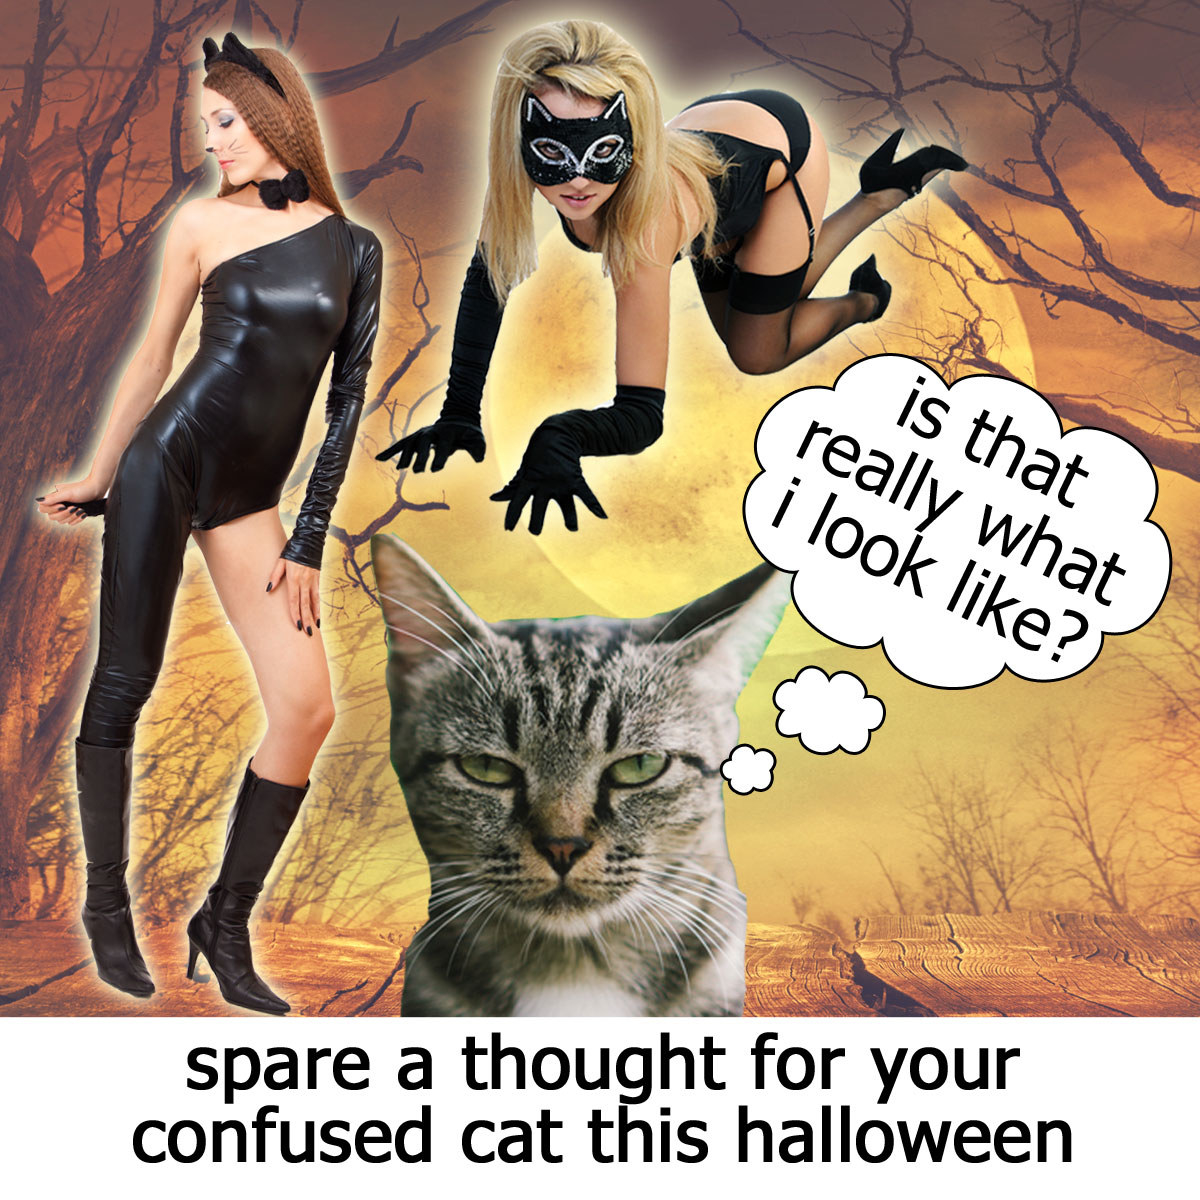 cat judging women dressed as sexy cats